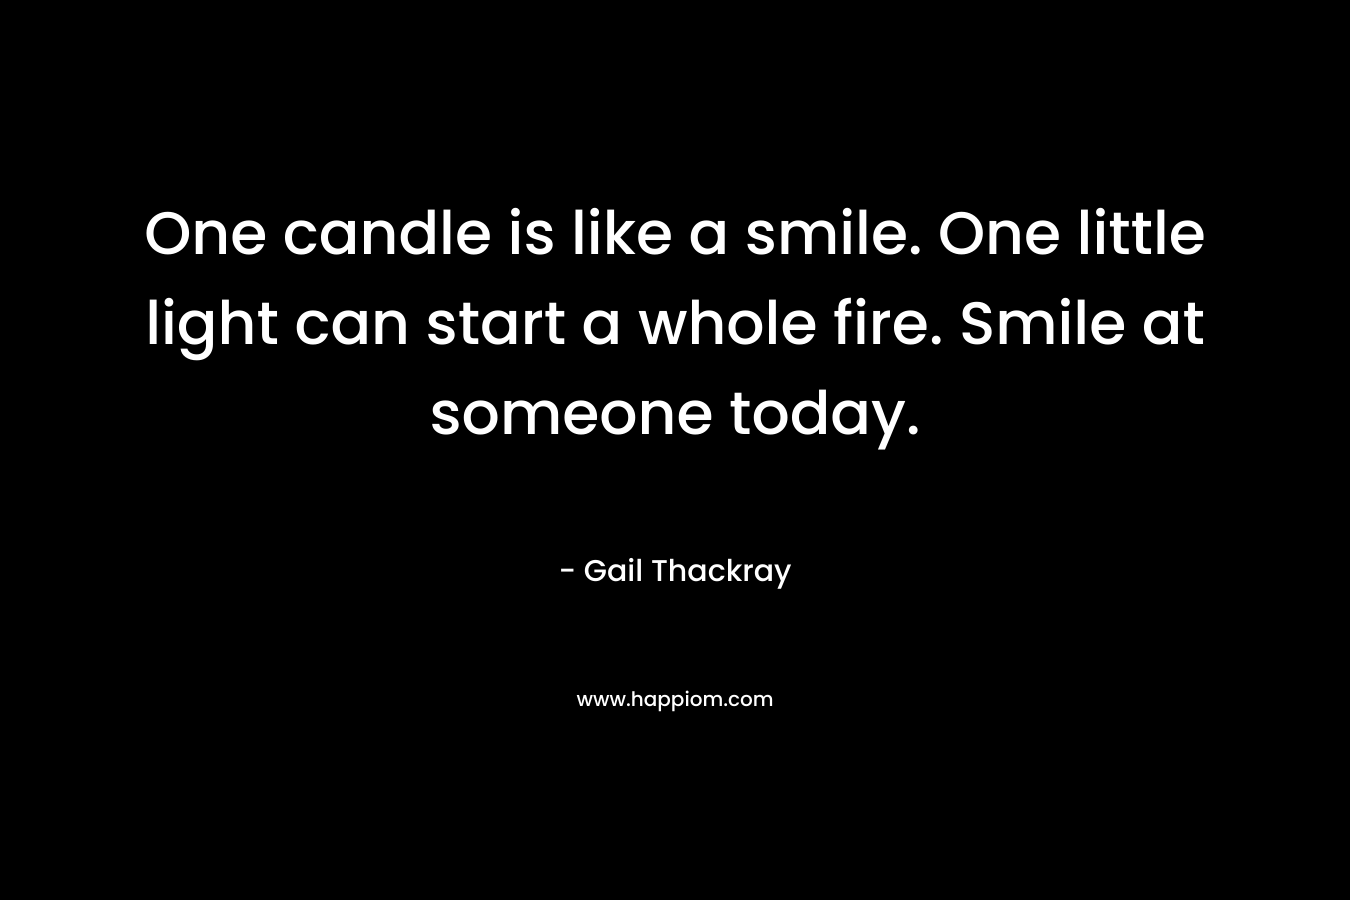 One candle is like a smile. One little light can start a whole fire. Smile at someone today. – Gail Thackray